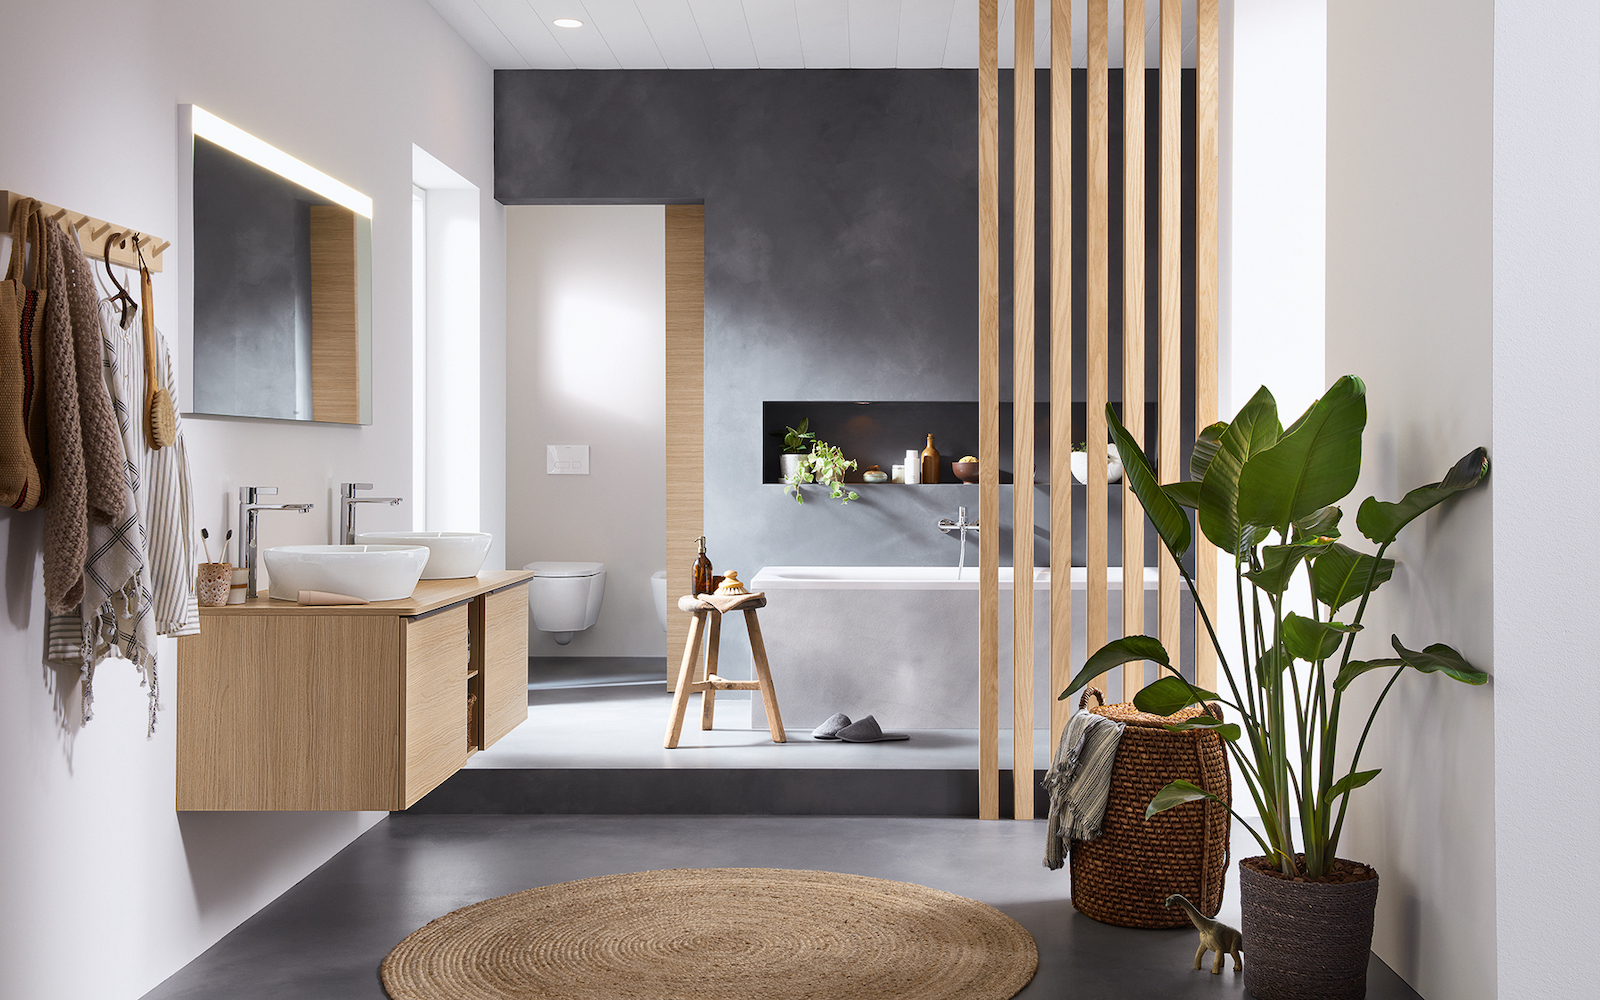 D Neo from Duravit